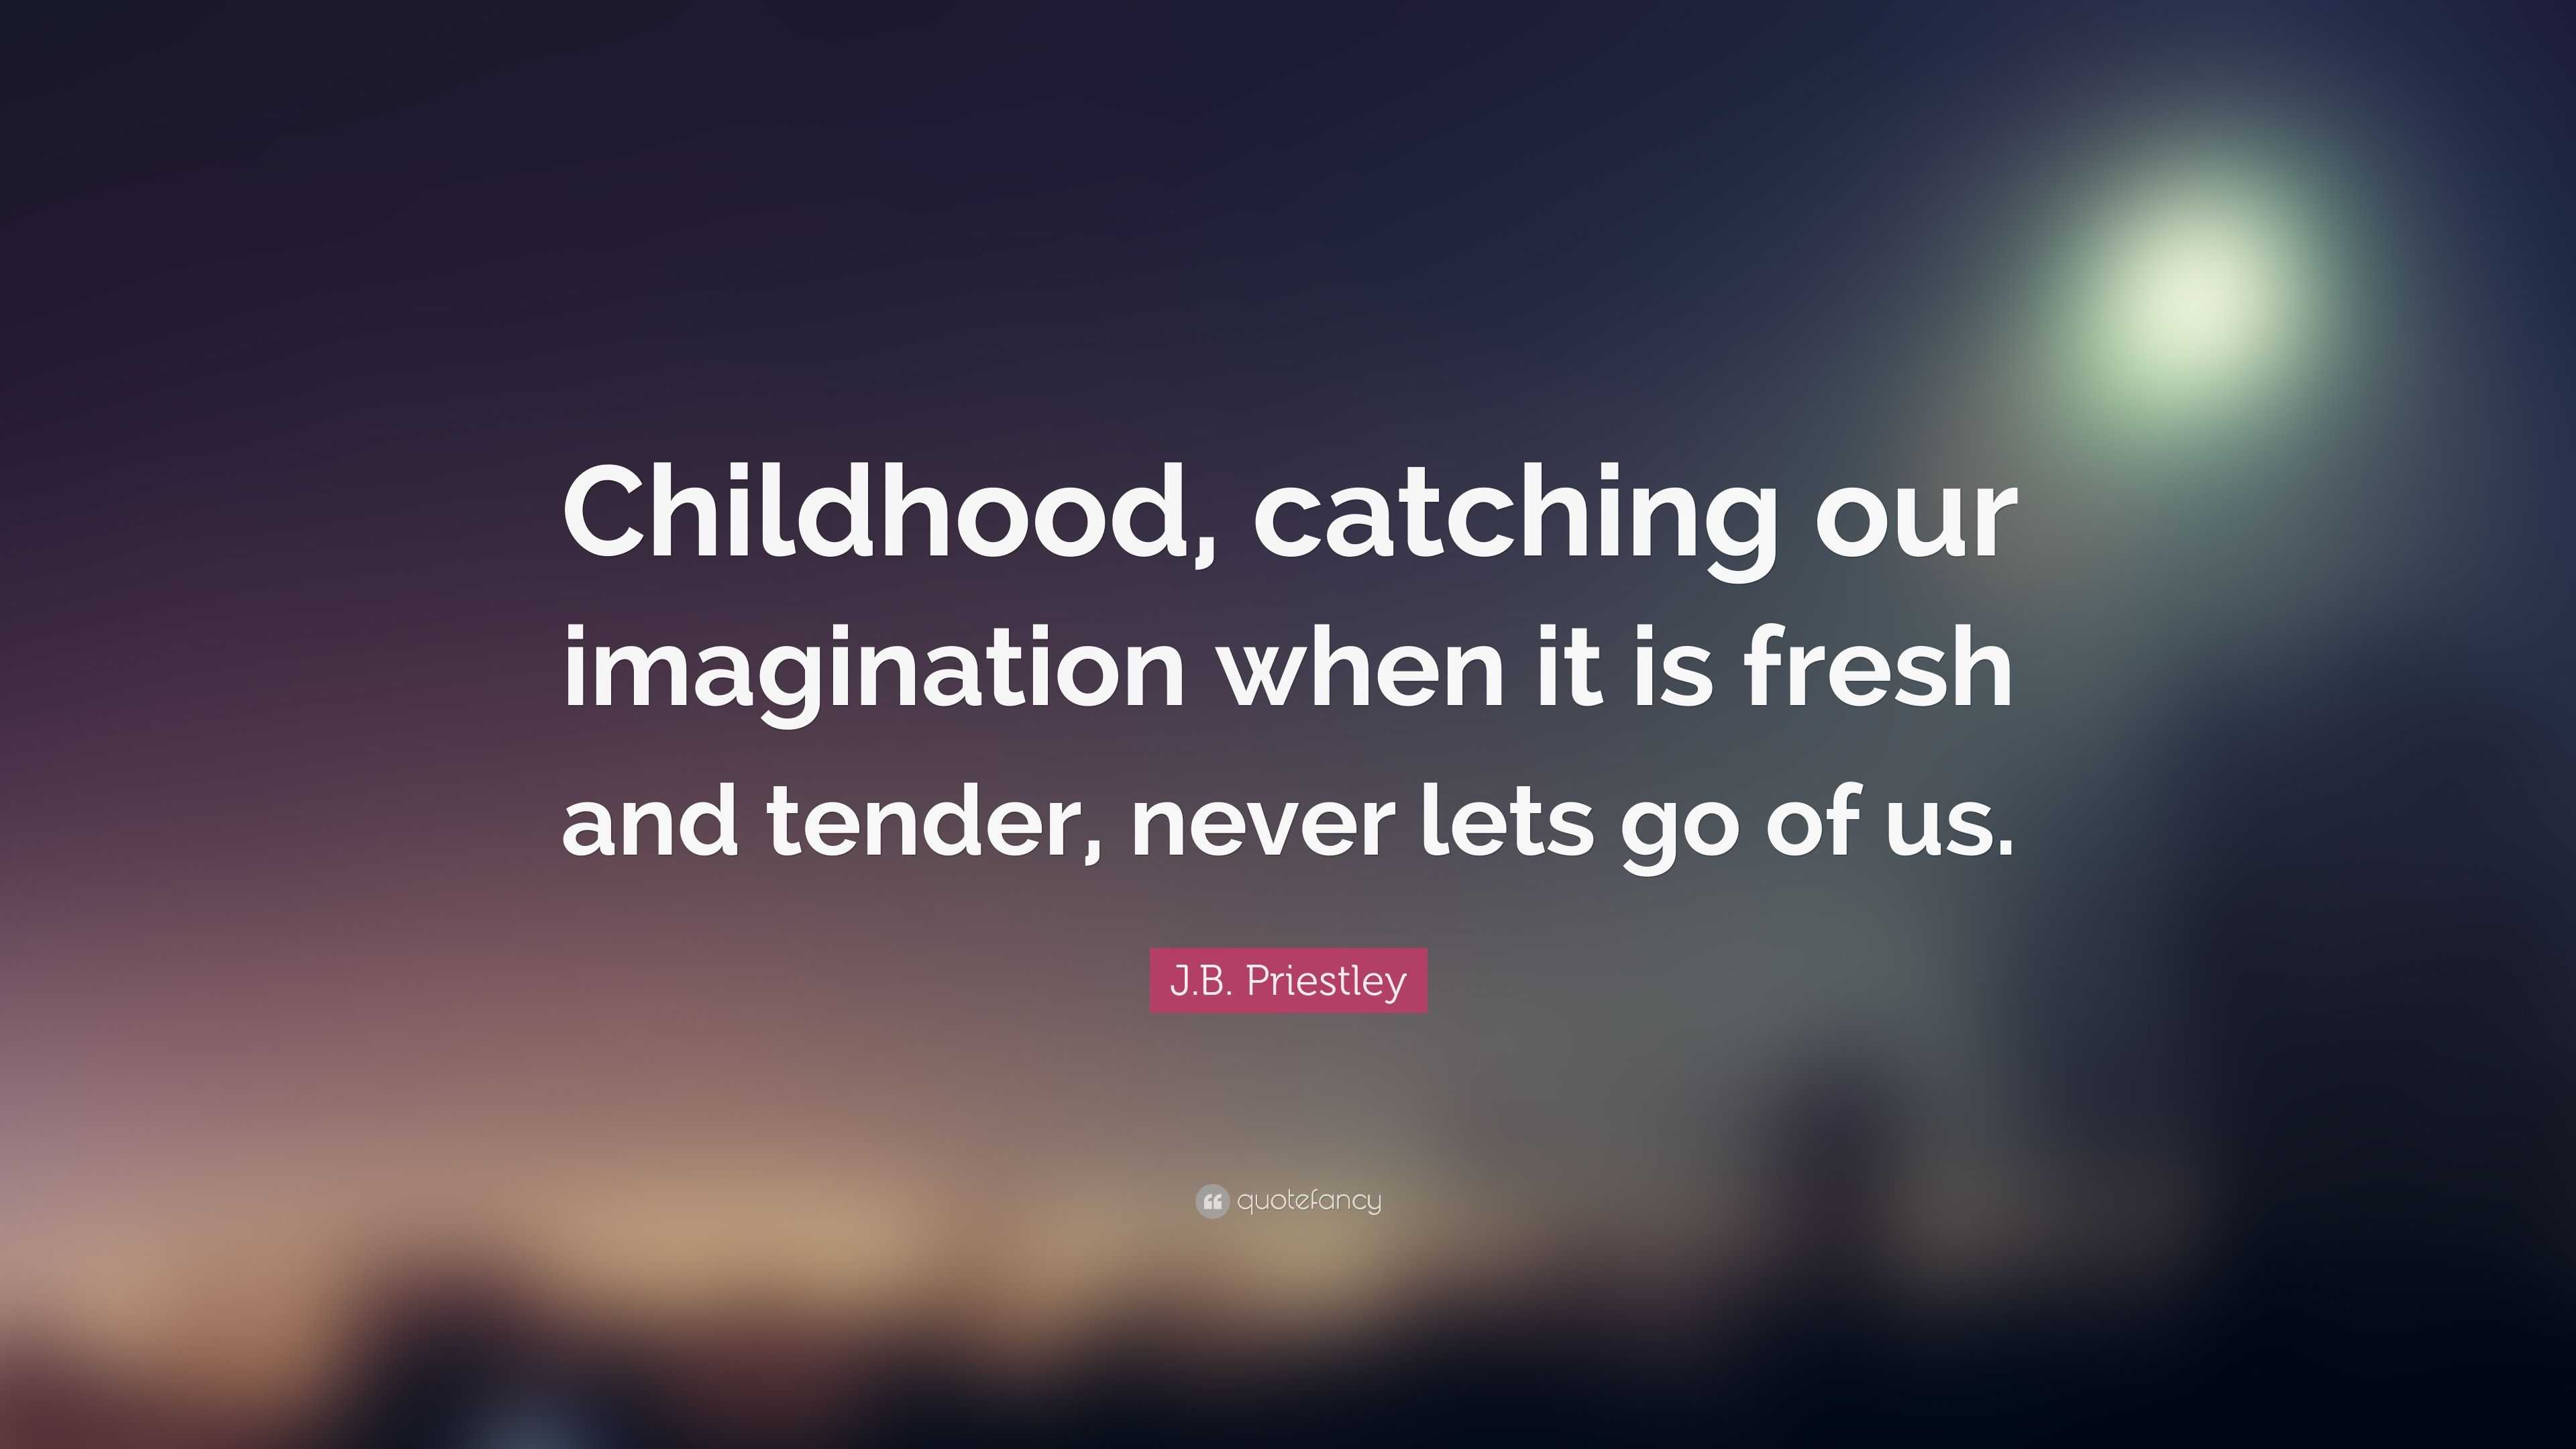 J.B. Priestley Quote: “Childhood, catching our imagination when it is ...